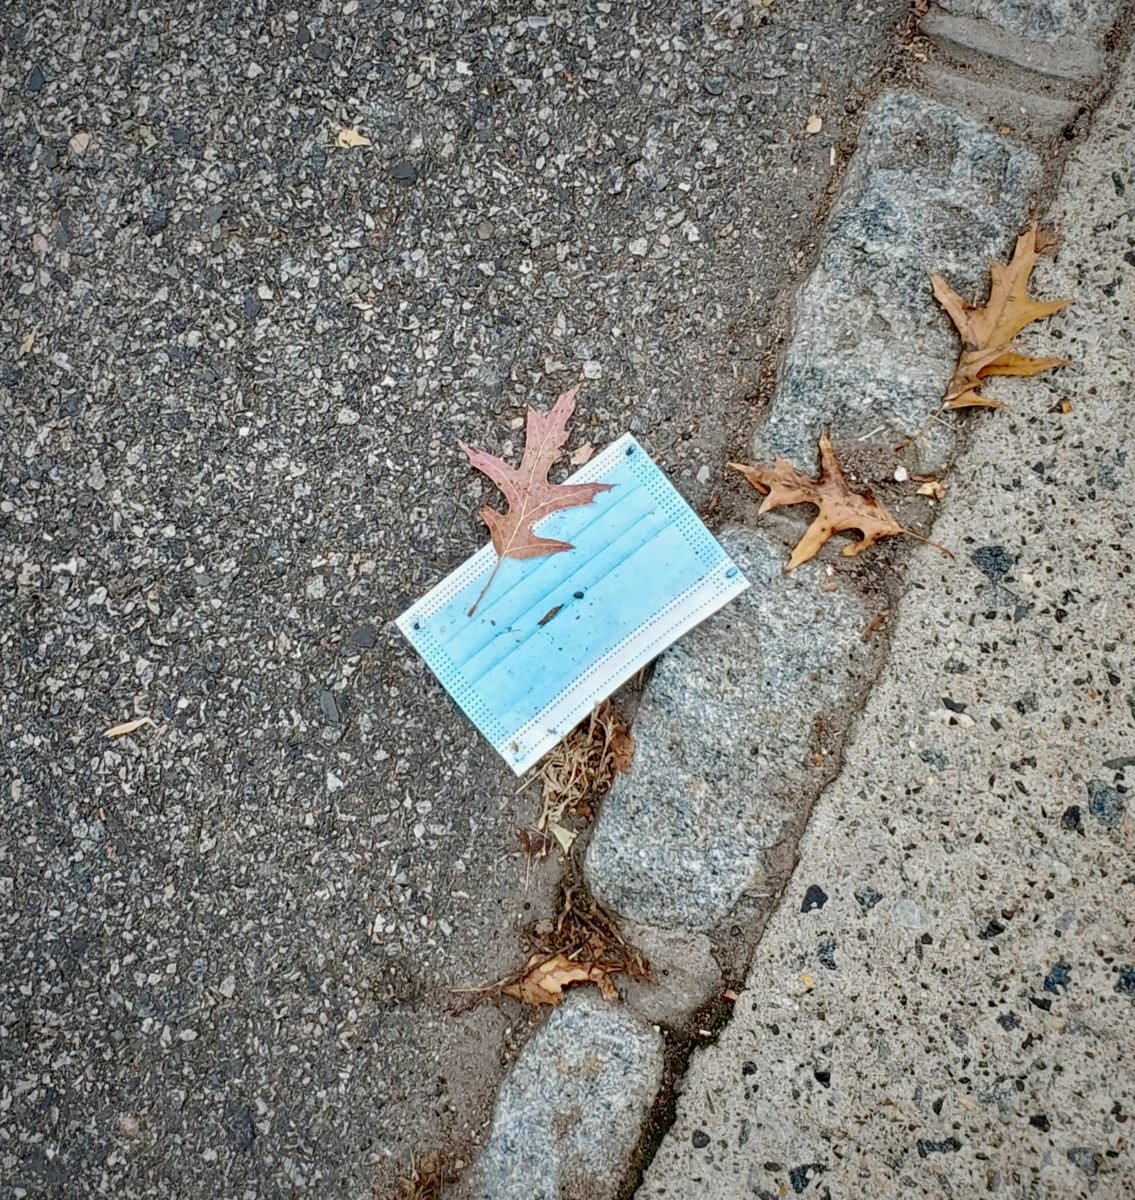 A surgical mask lies on the road with leaf litter.